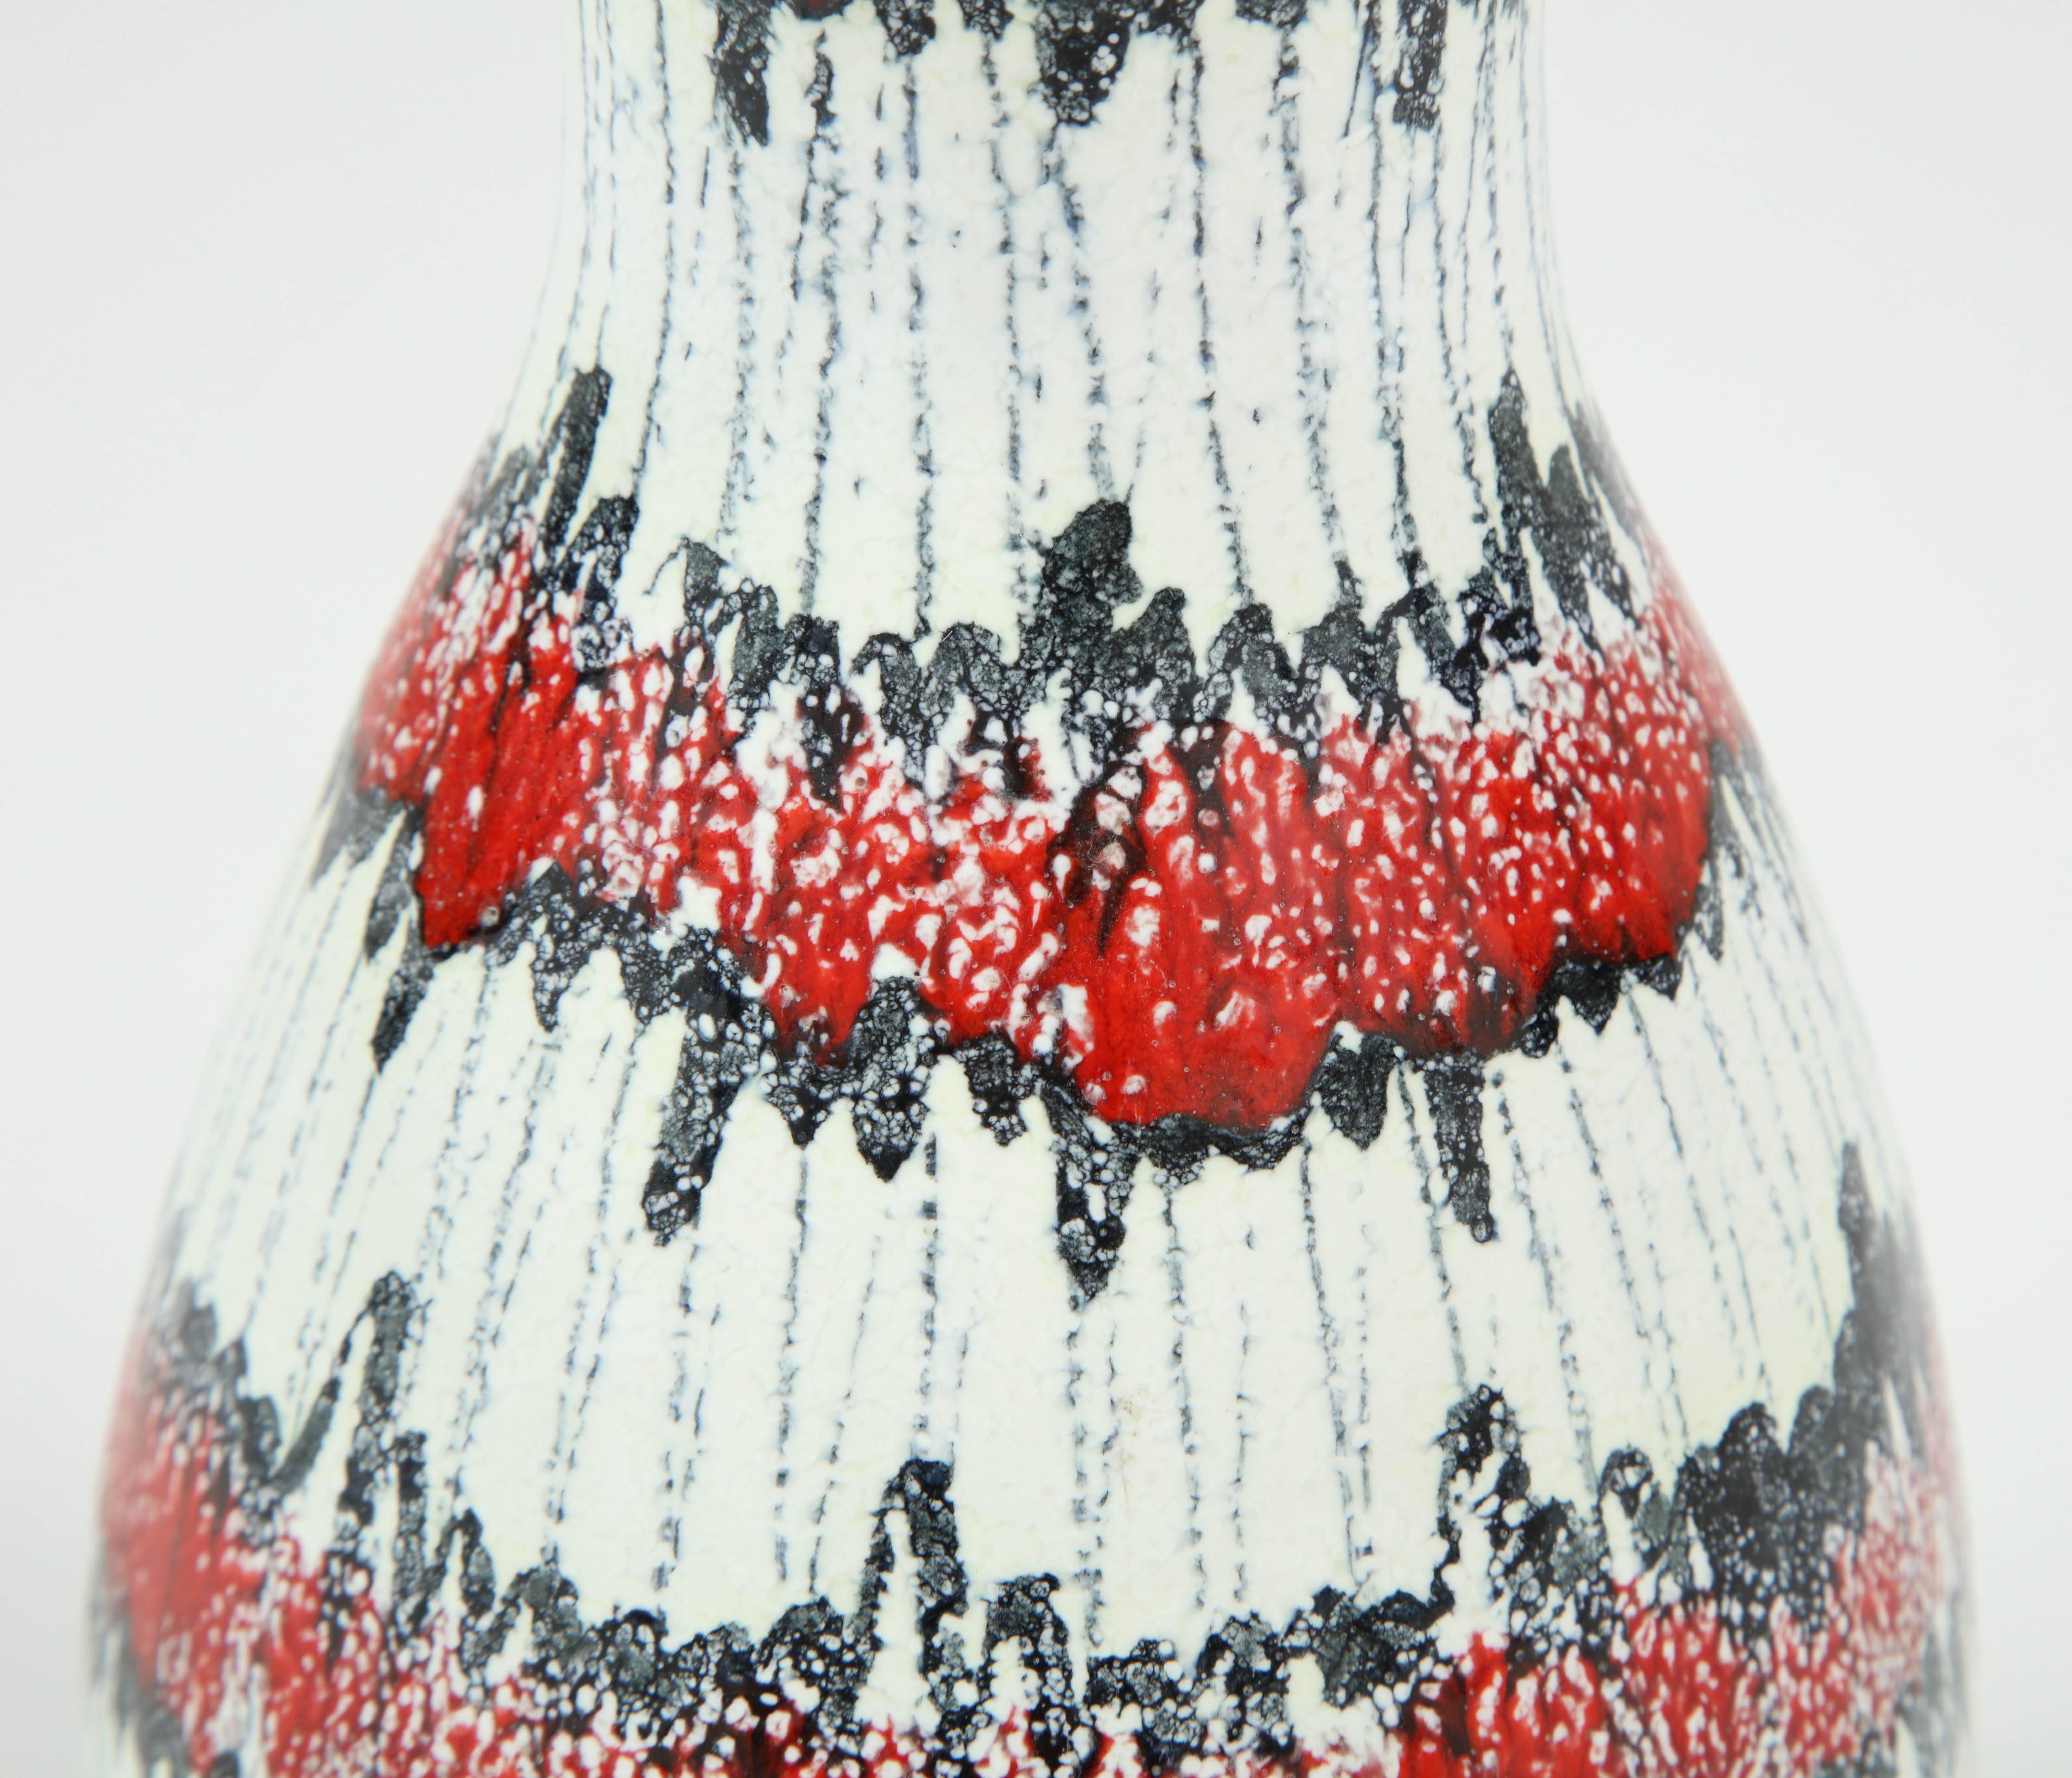 Ceramic Pitcher, Red, White and Black, Italy, Midcentury, C 1950, Ceramic In Good Condition For Sale In New York, NY